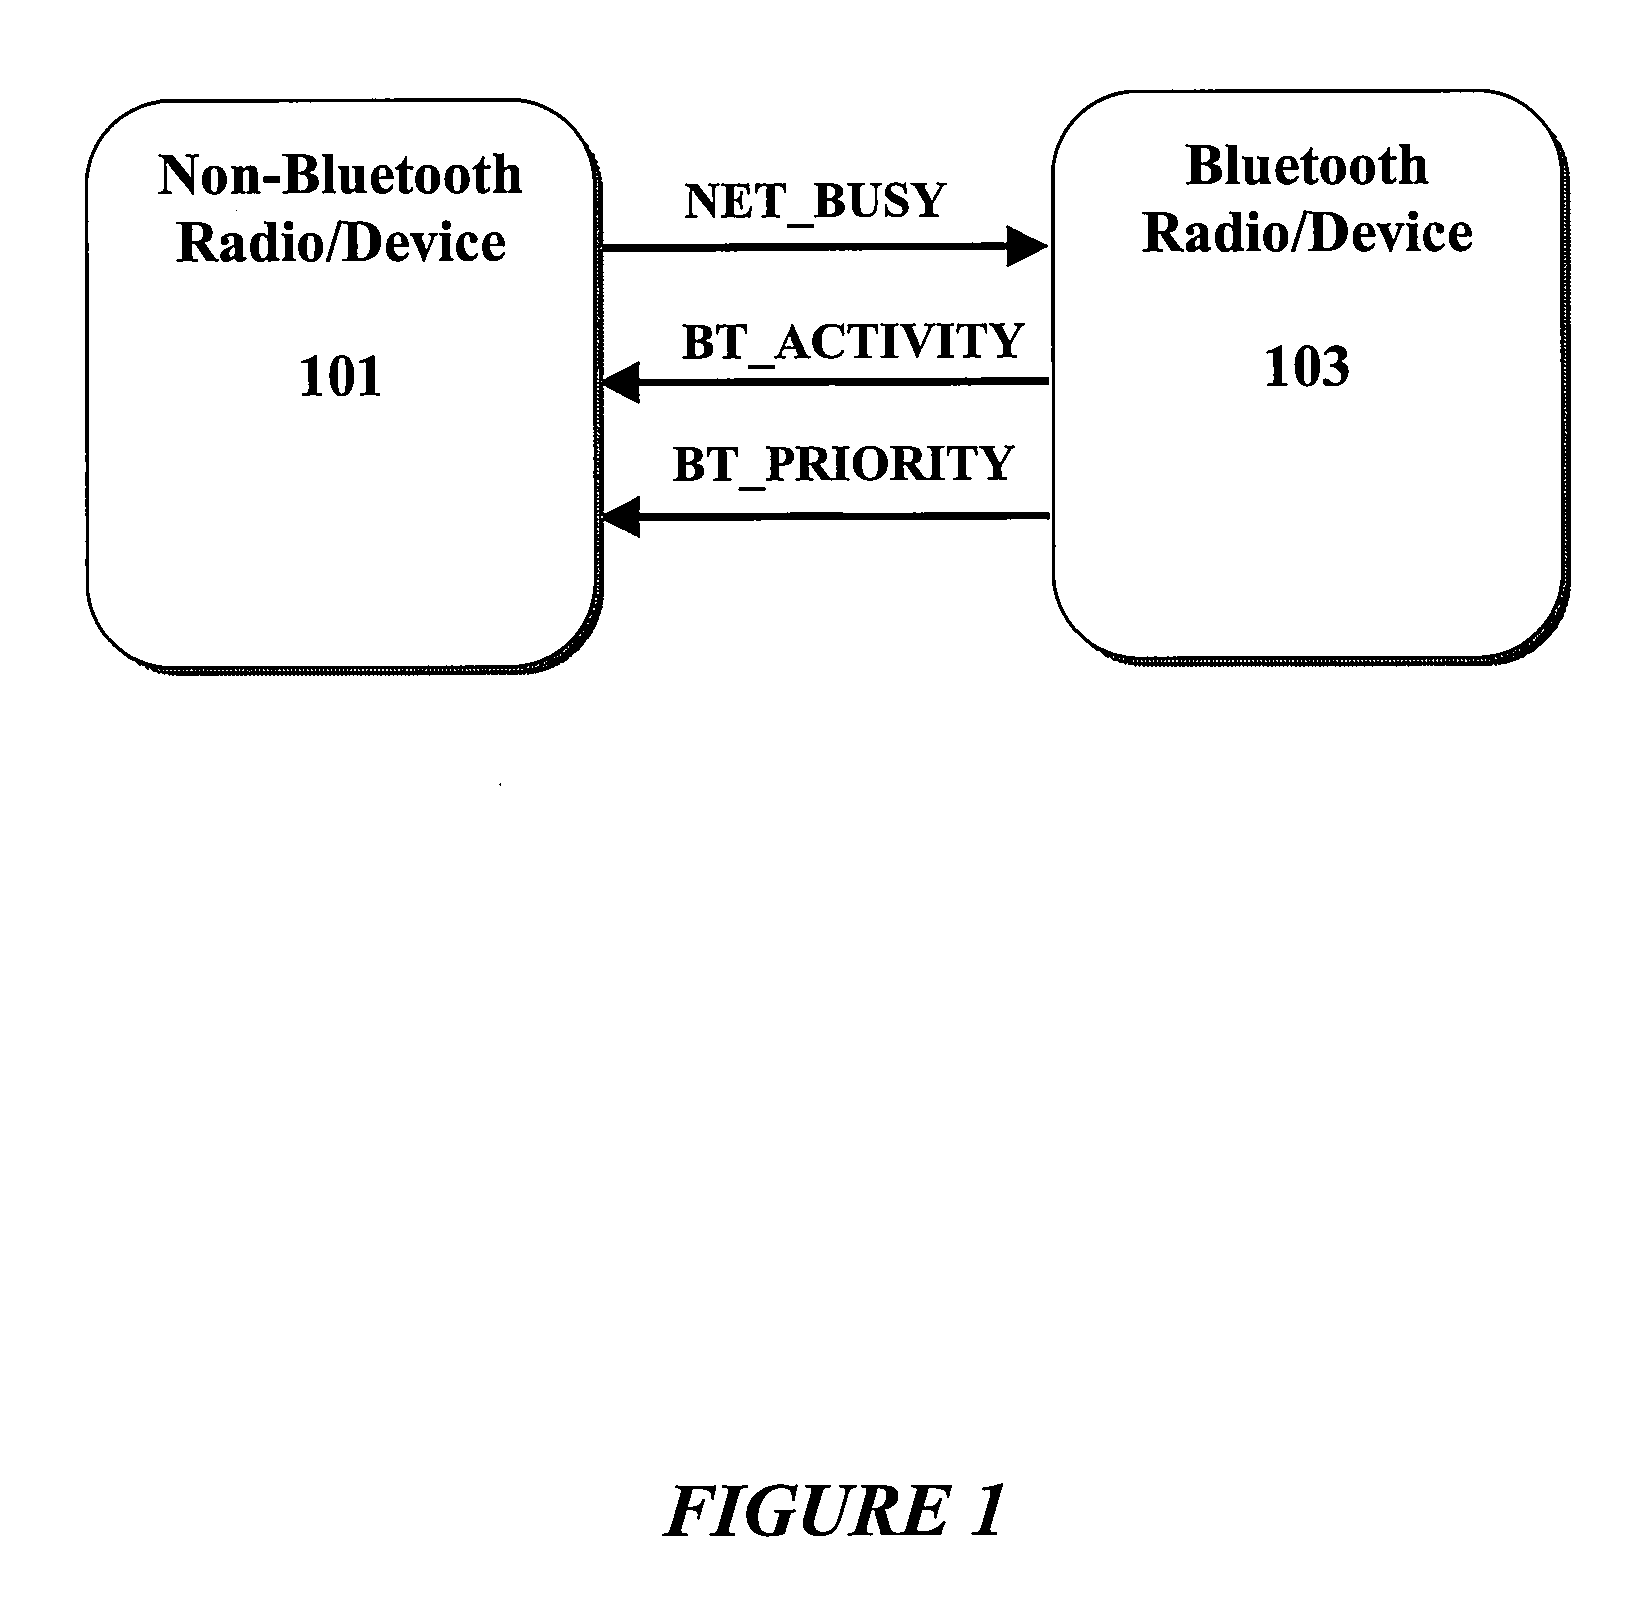 System and method for improving bluetooth performance in the presence of a coexistent, non-bluetooth, wireless device